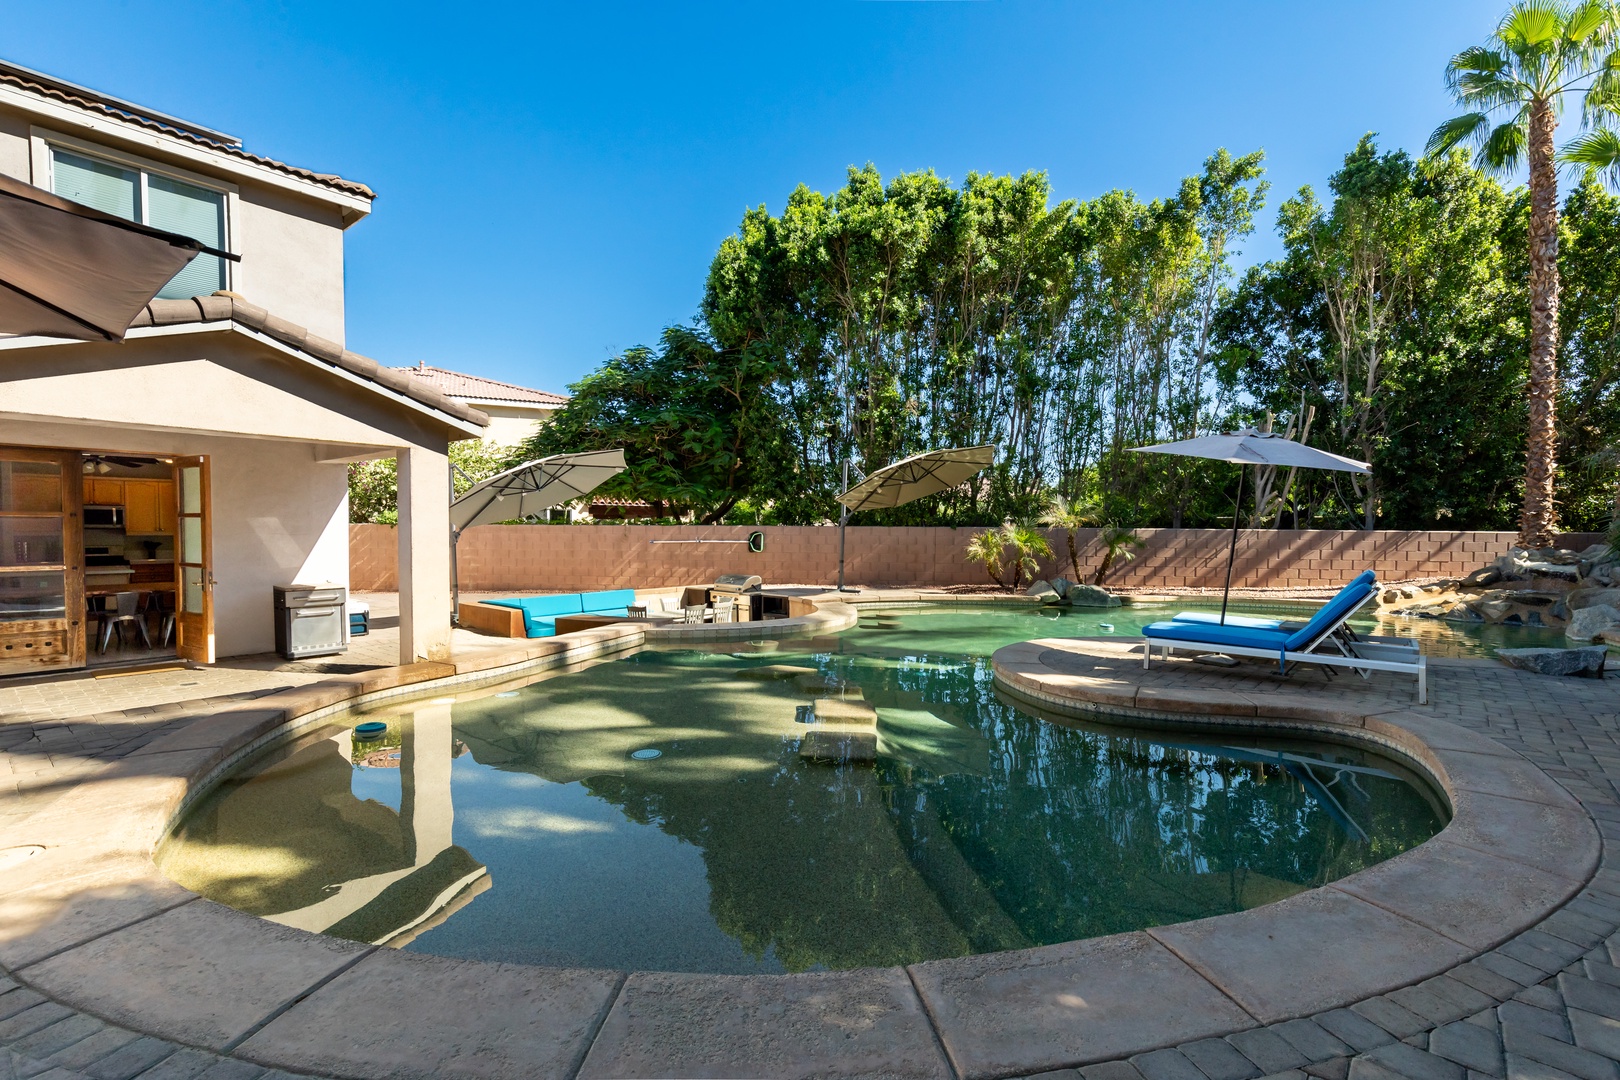 Private pool, adequate seating, firepit area, and grilling area